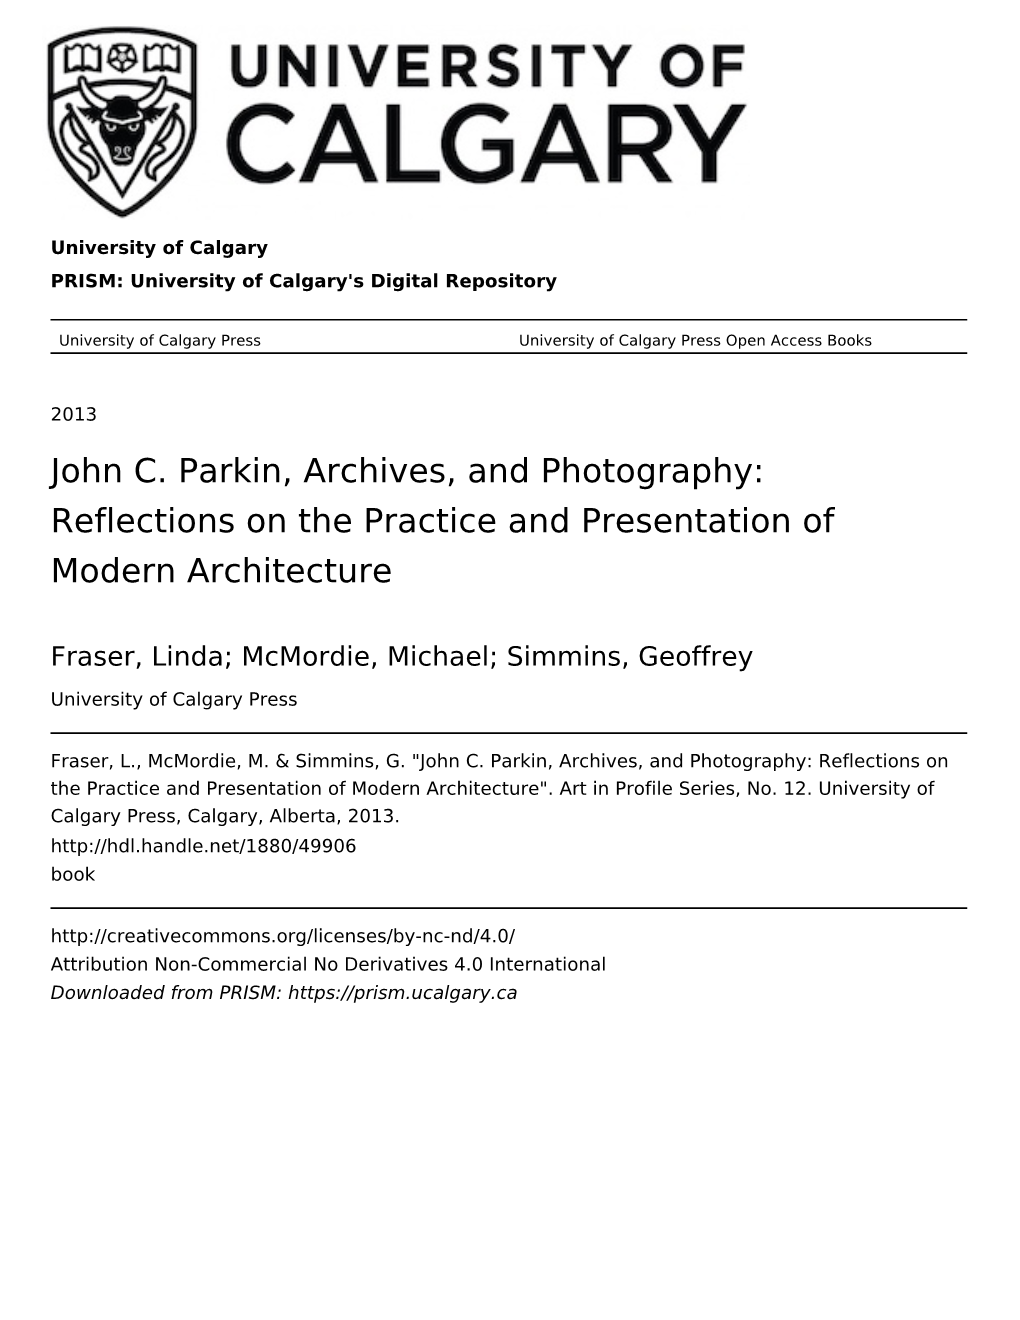 John C. Parkin, Archives, and Photography: Reflections on the Practice and Presentation of Modern Architecture